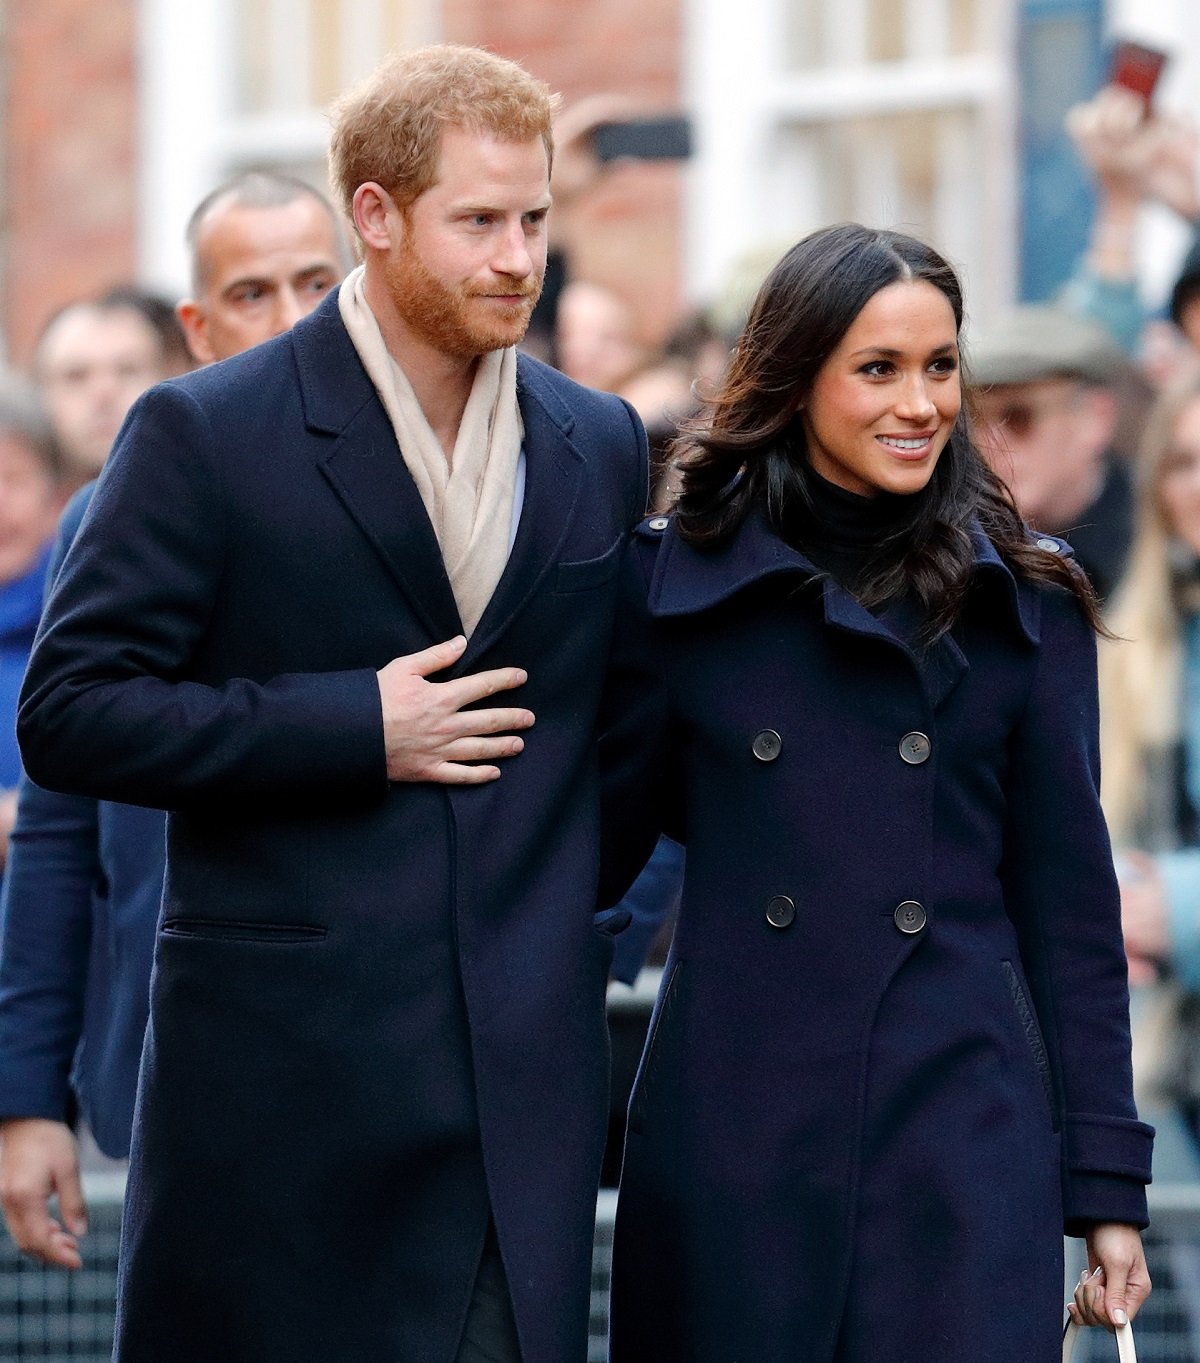 Prince Harry and Meghan Markle attend a Terrence Higgins Trust World AIDS Day charity fair at Nottingham Contemporary on December 1, 2017 in Nottingham, England.